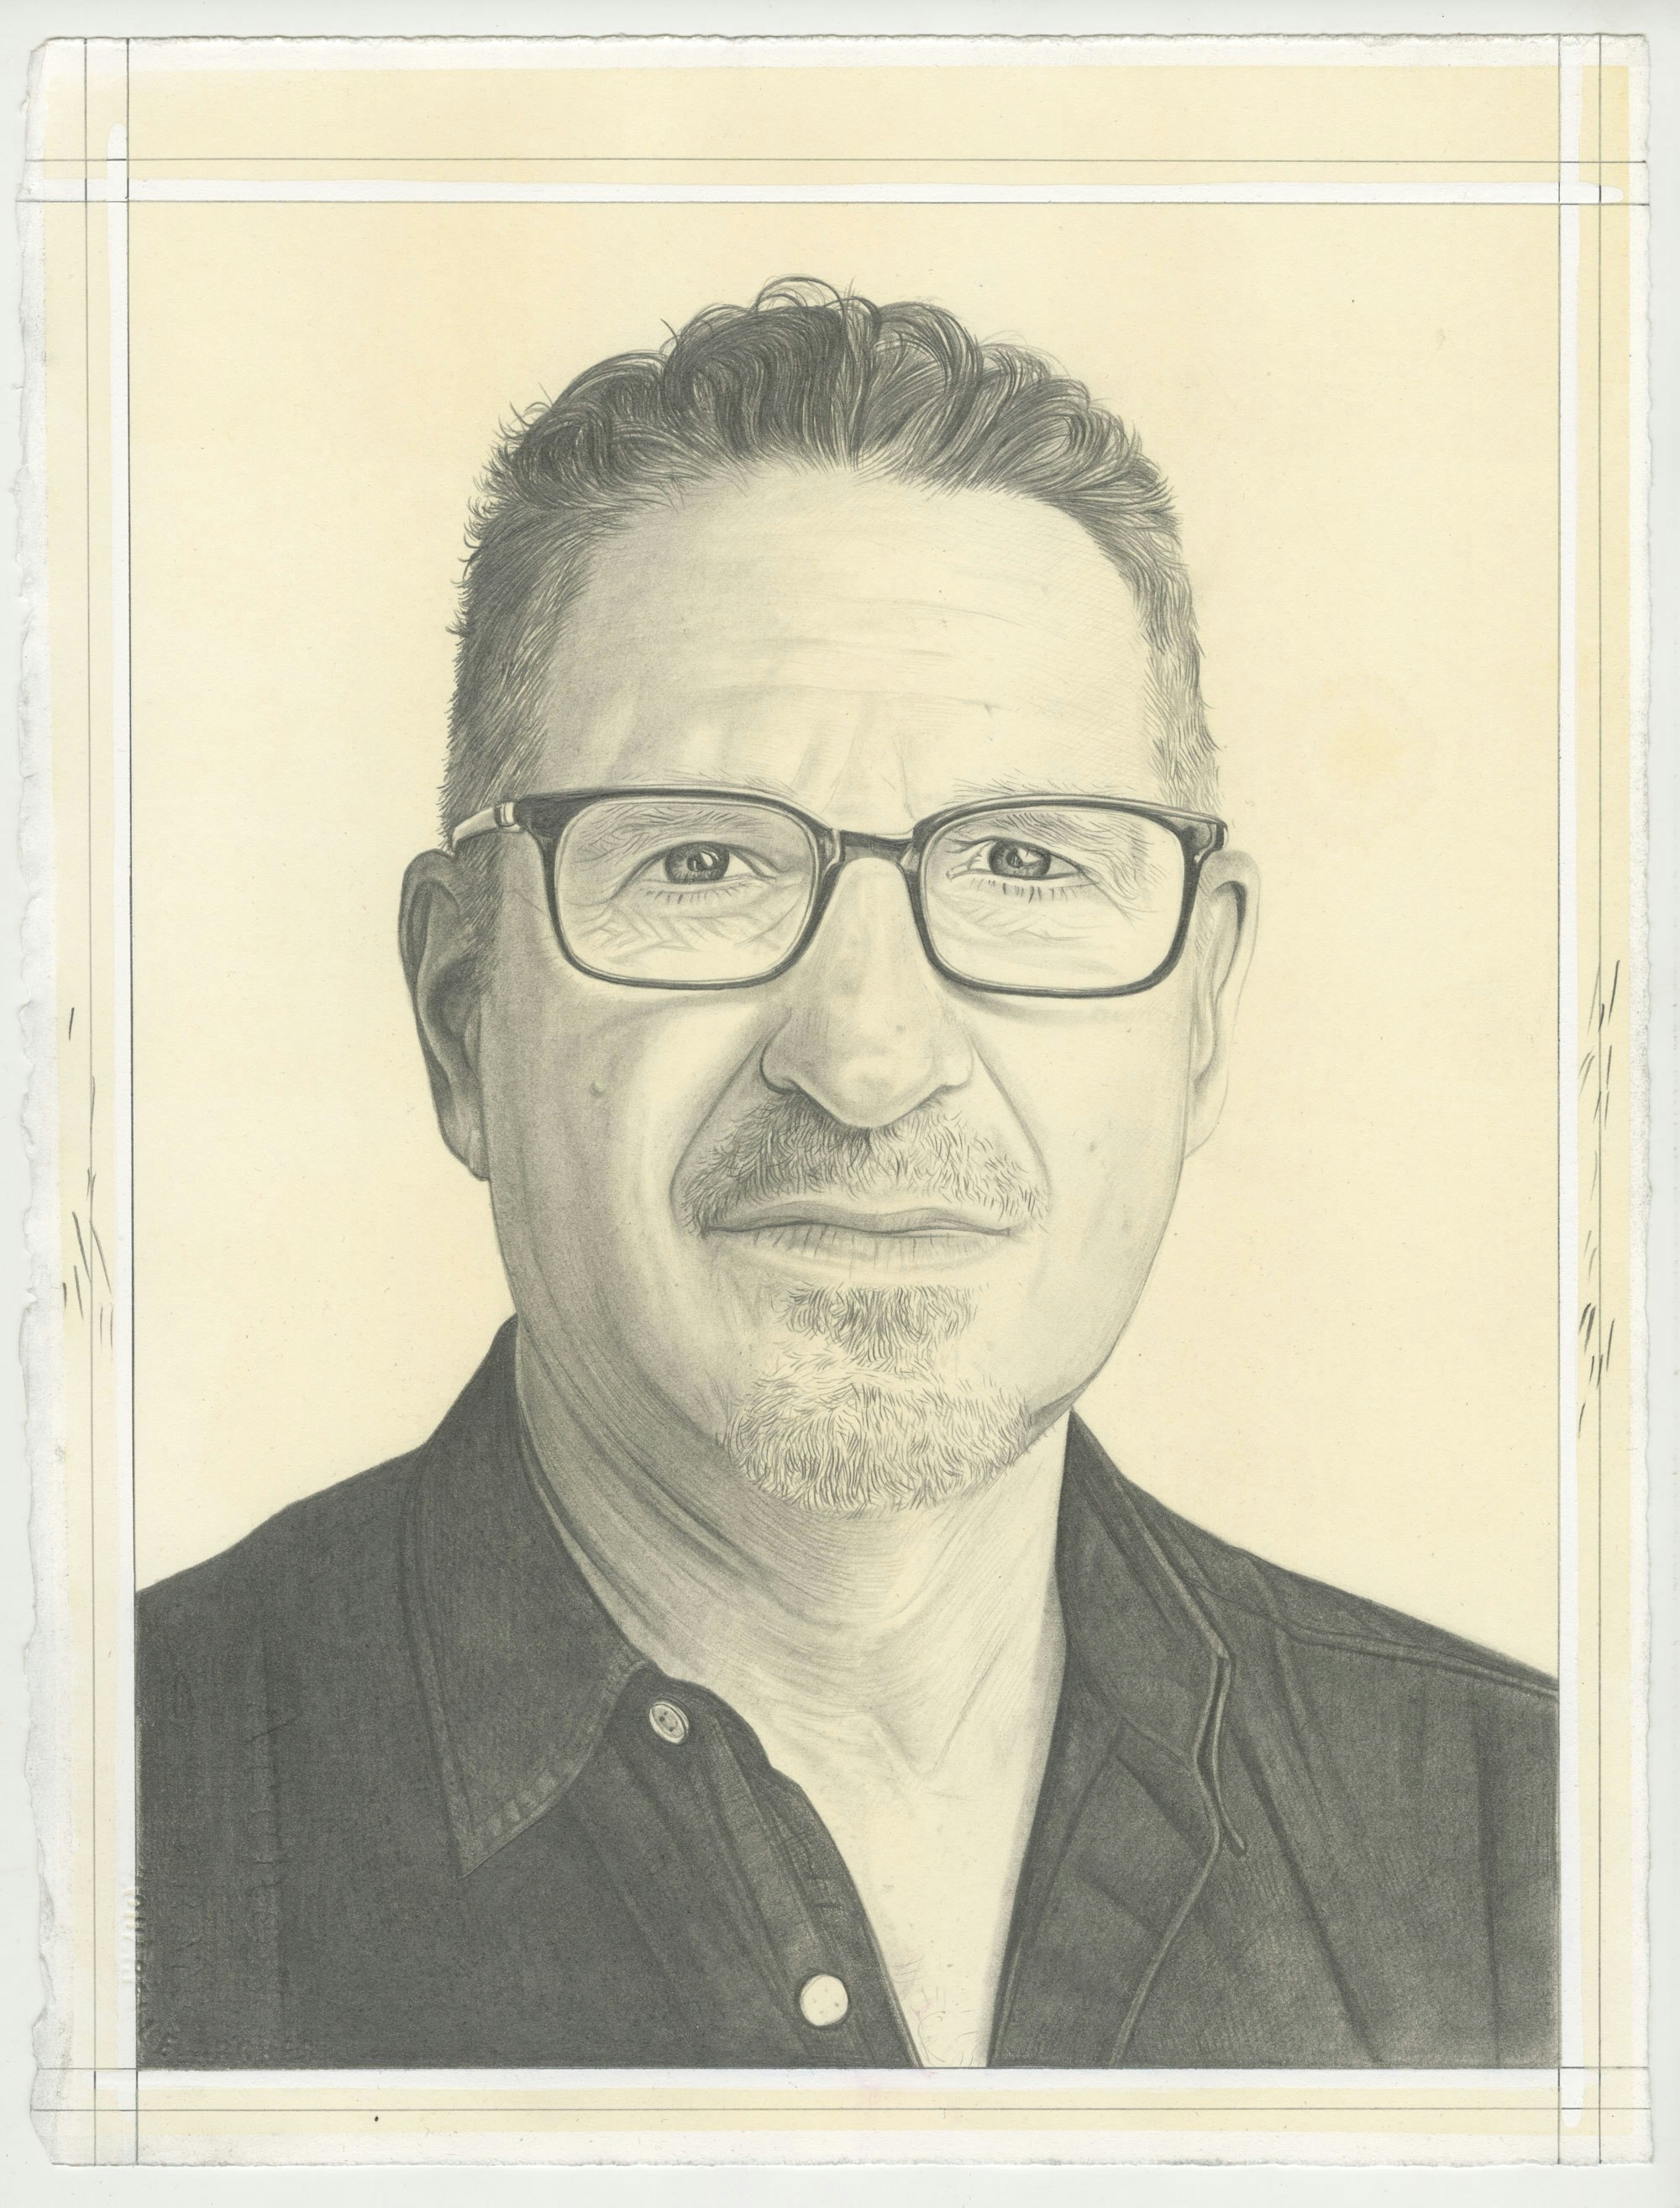 Portrait of George Bisacca, pencil on paper by Phong Bui.